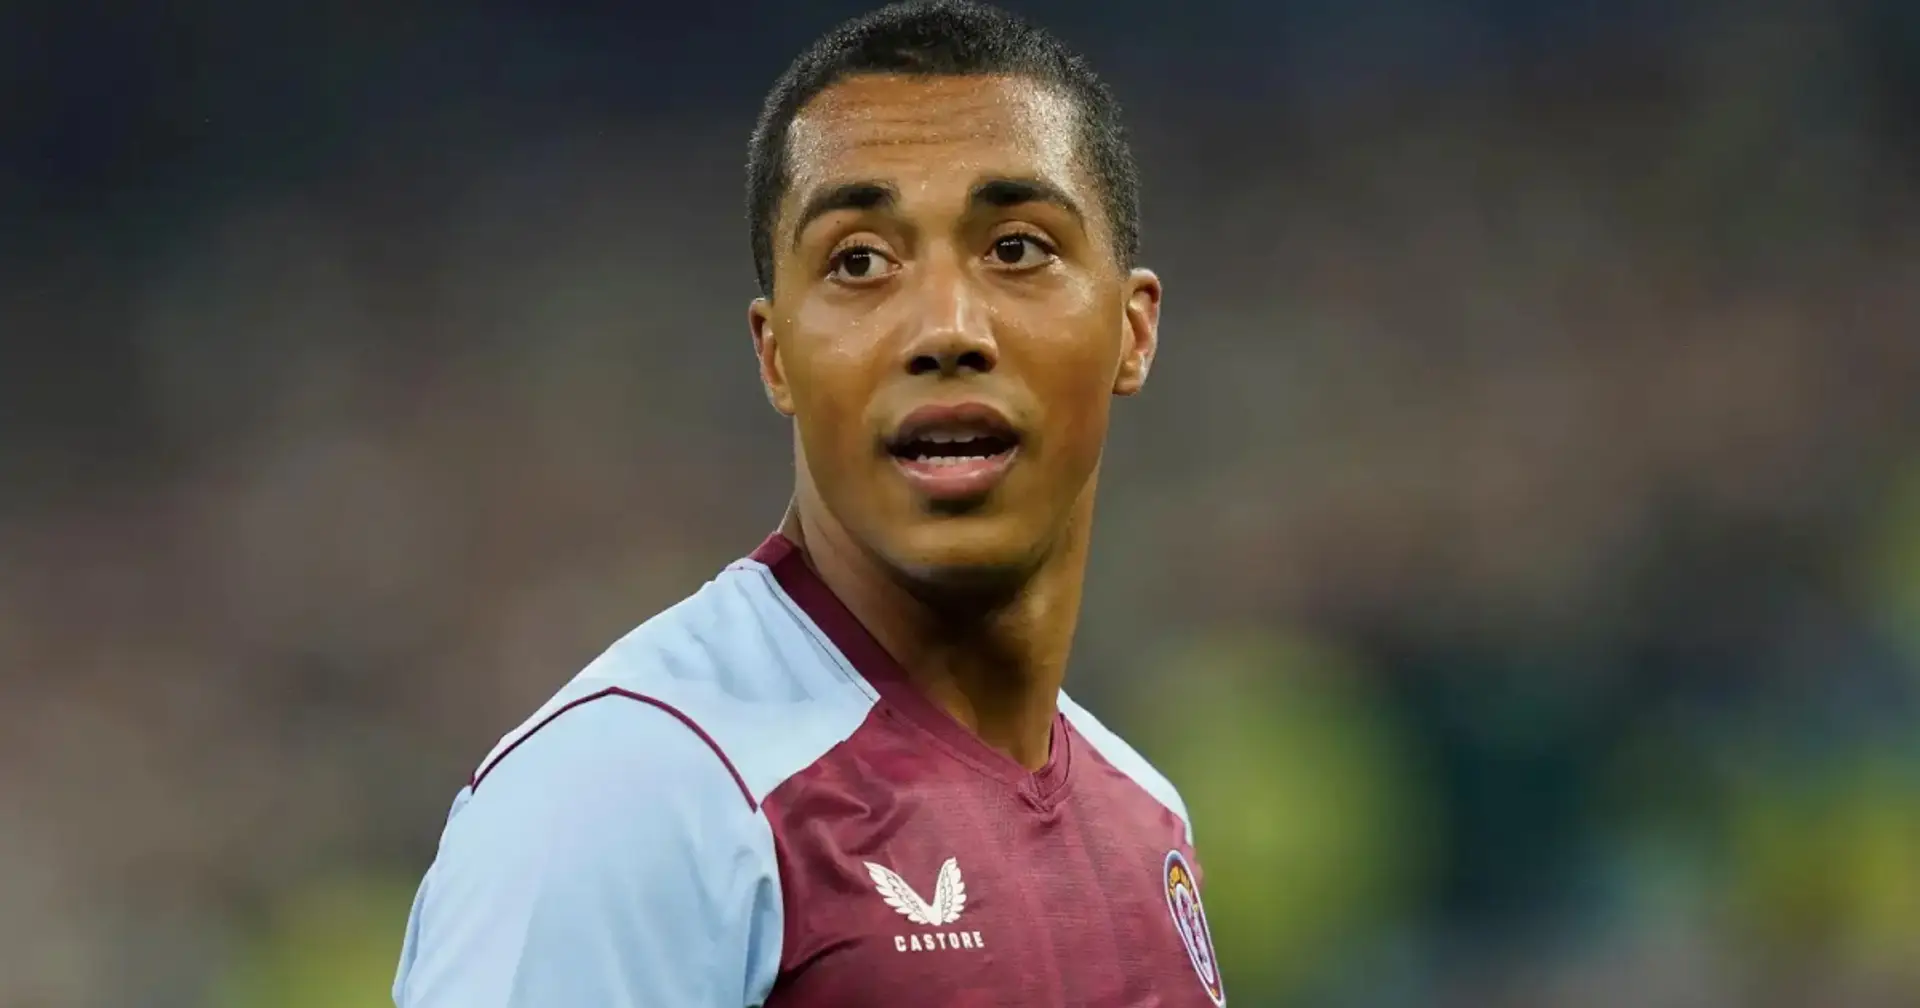 Youri Tielemans wants out of Aston Villa - he only joined in summer